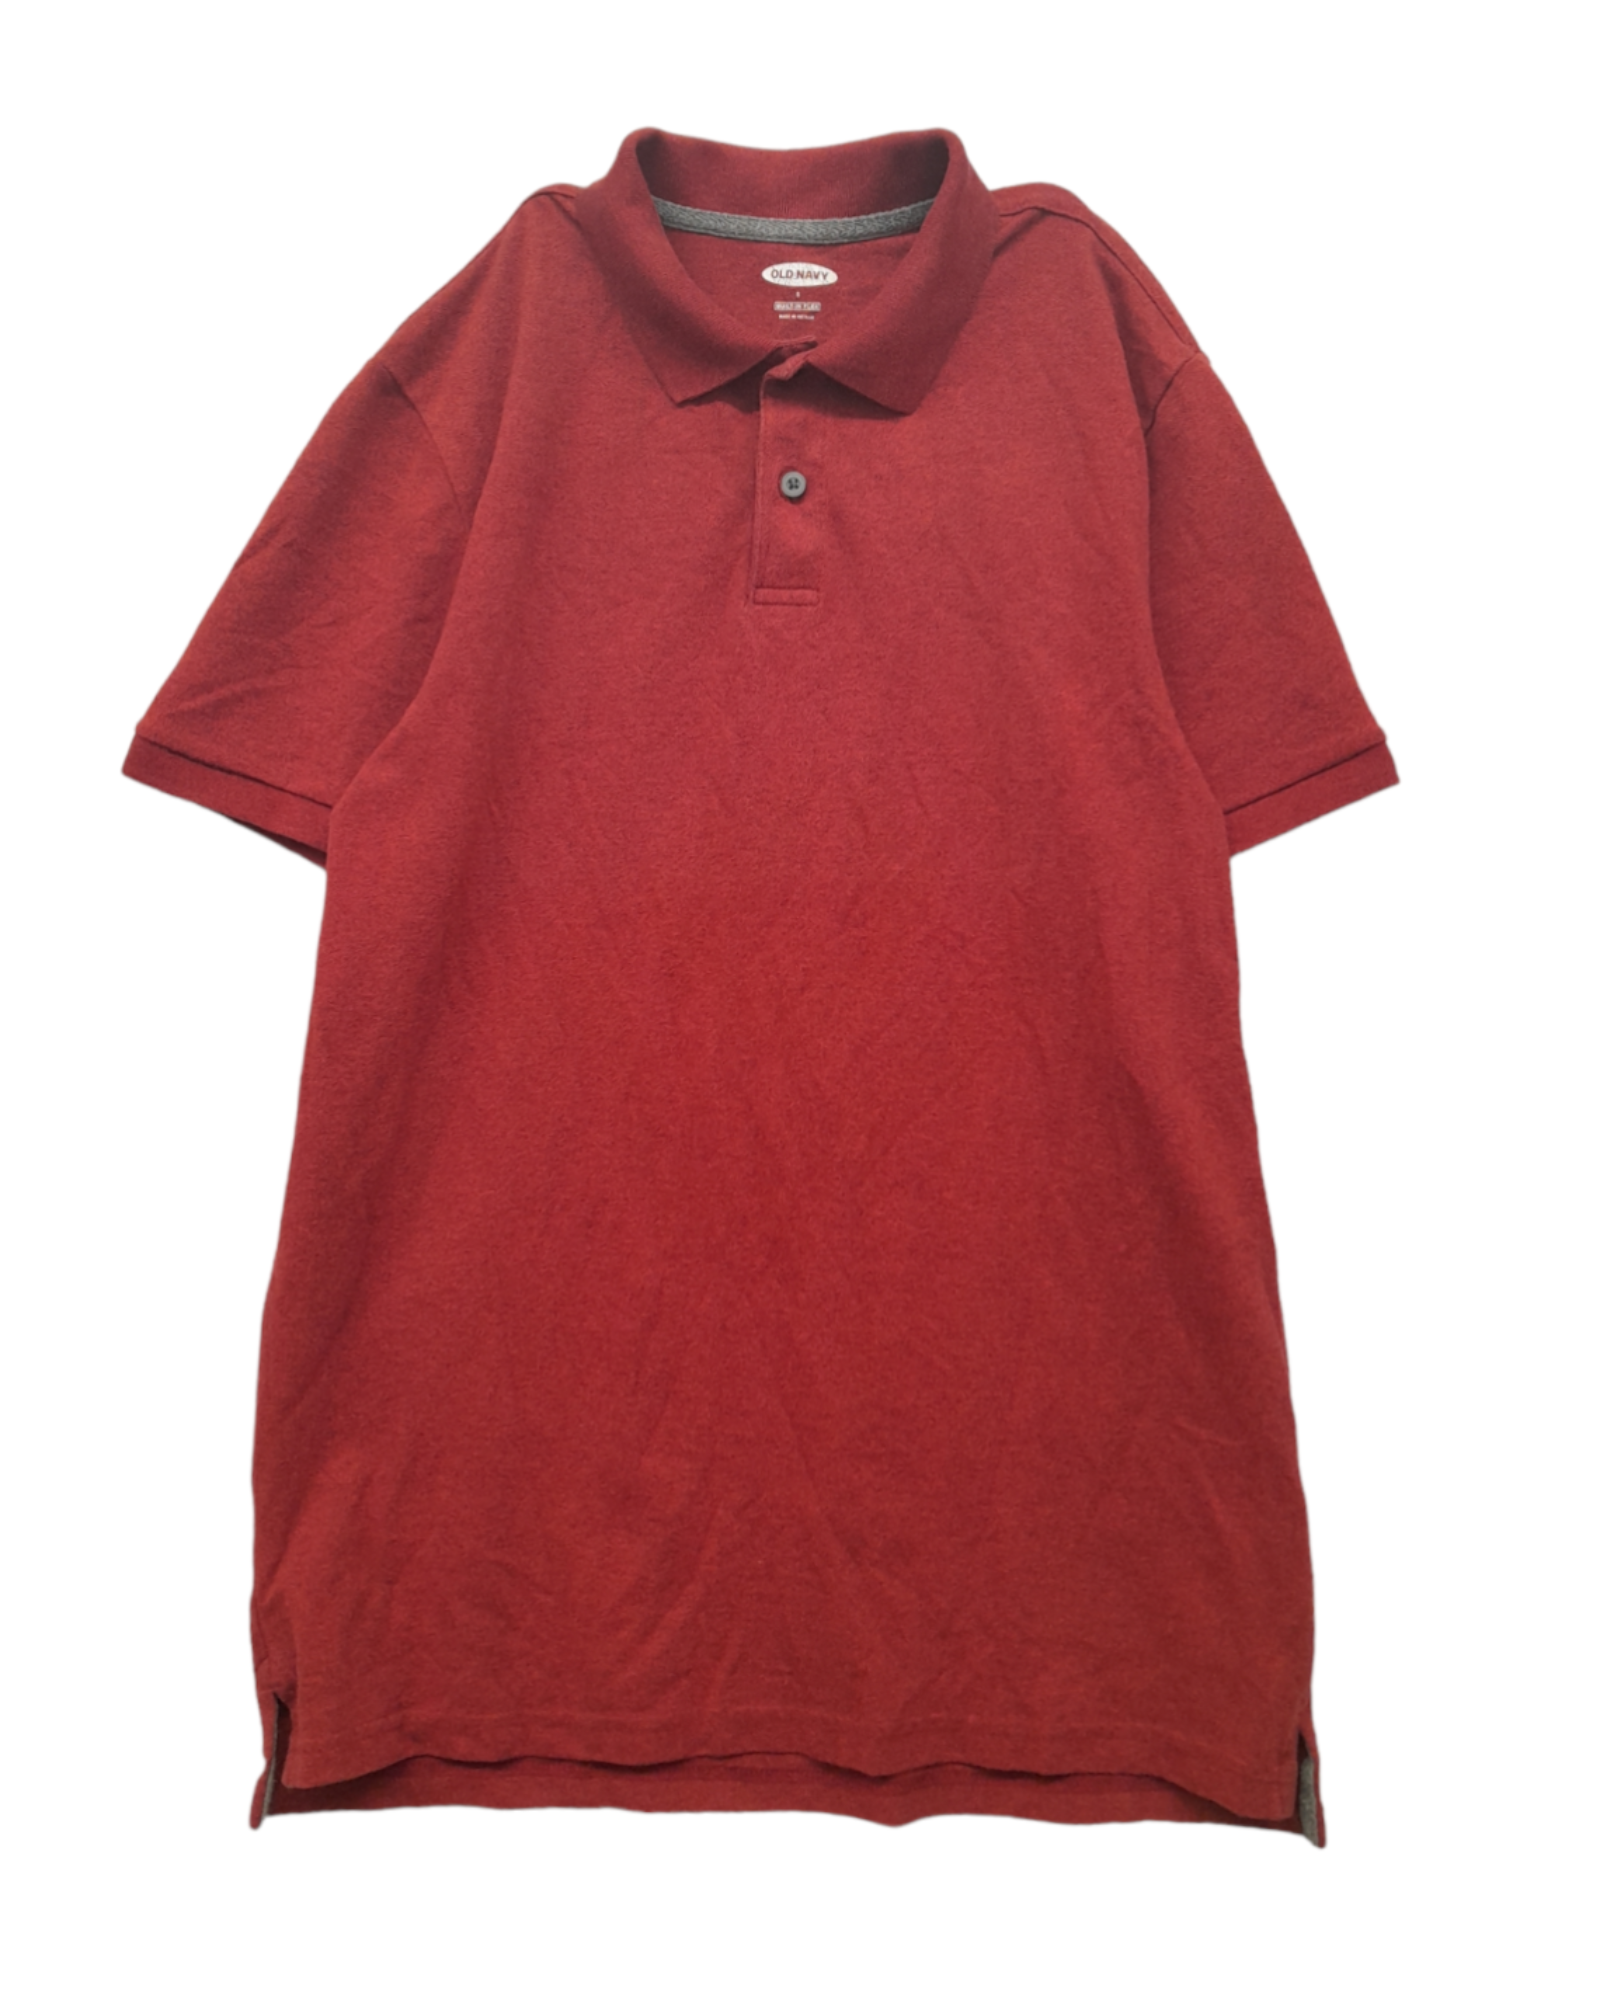 Camisas Tipo Polo Old Navy